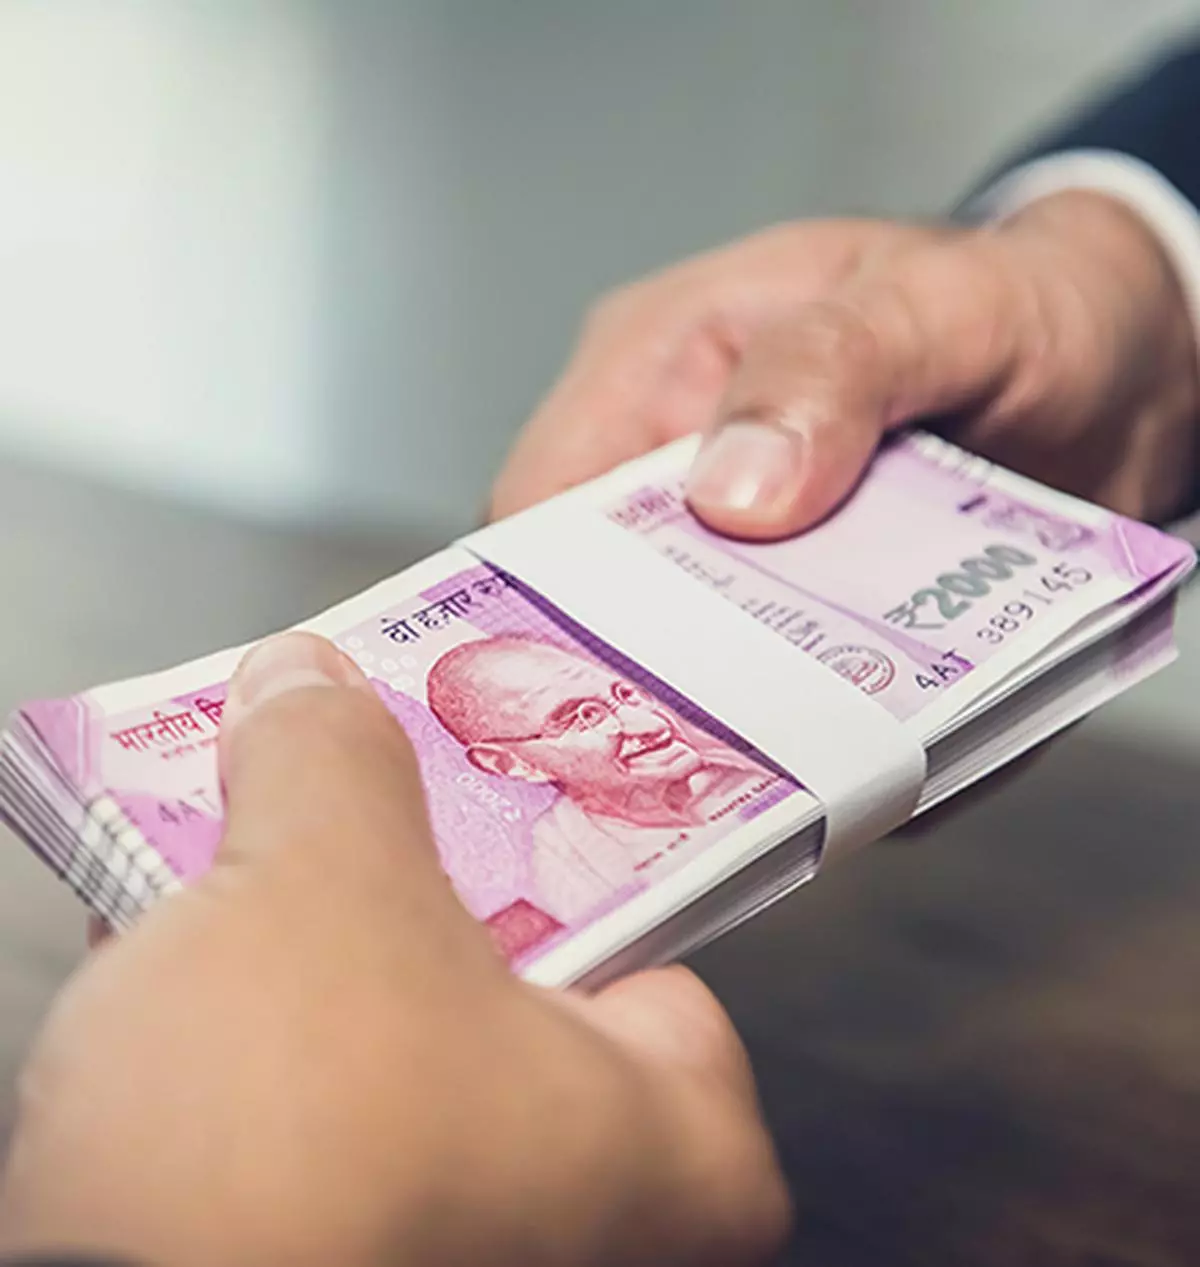 Godrej Capital will be involved in unsecured small business lending| Roadsleeper.com